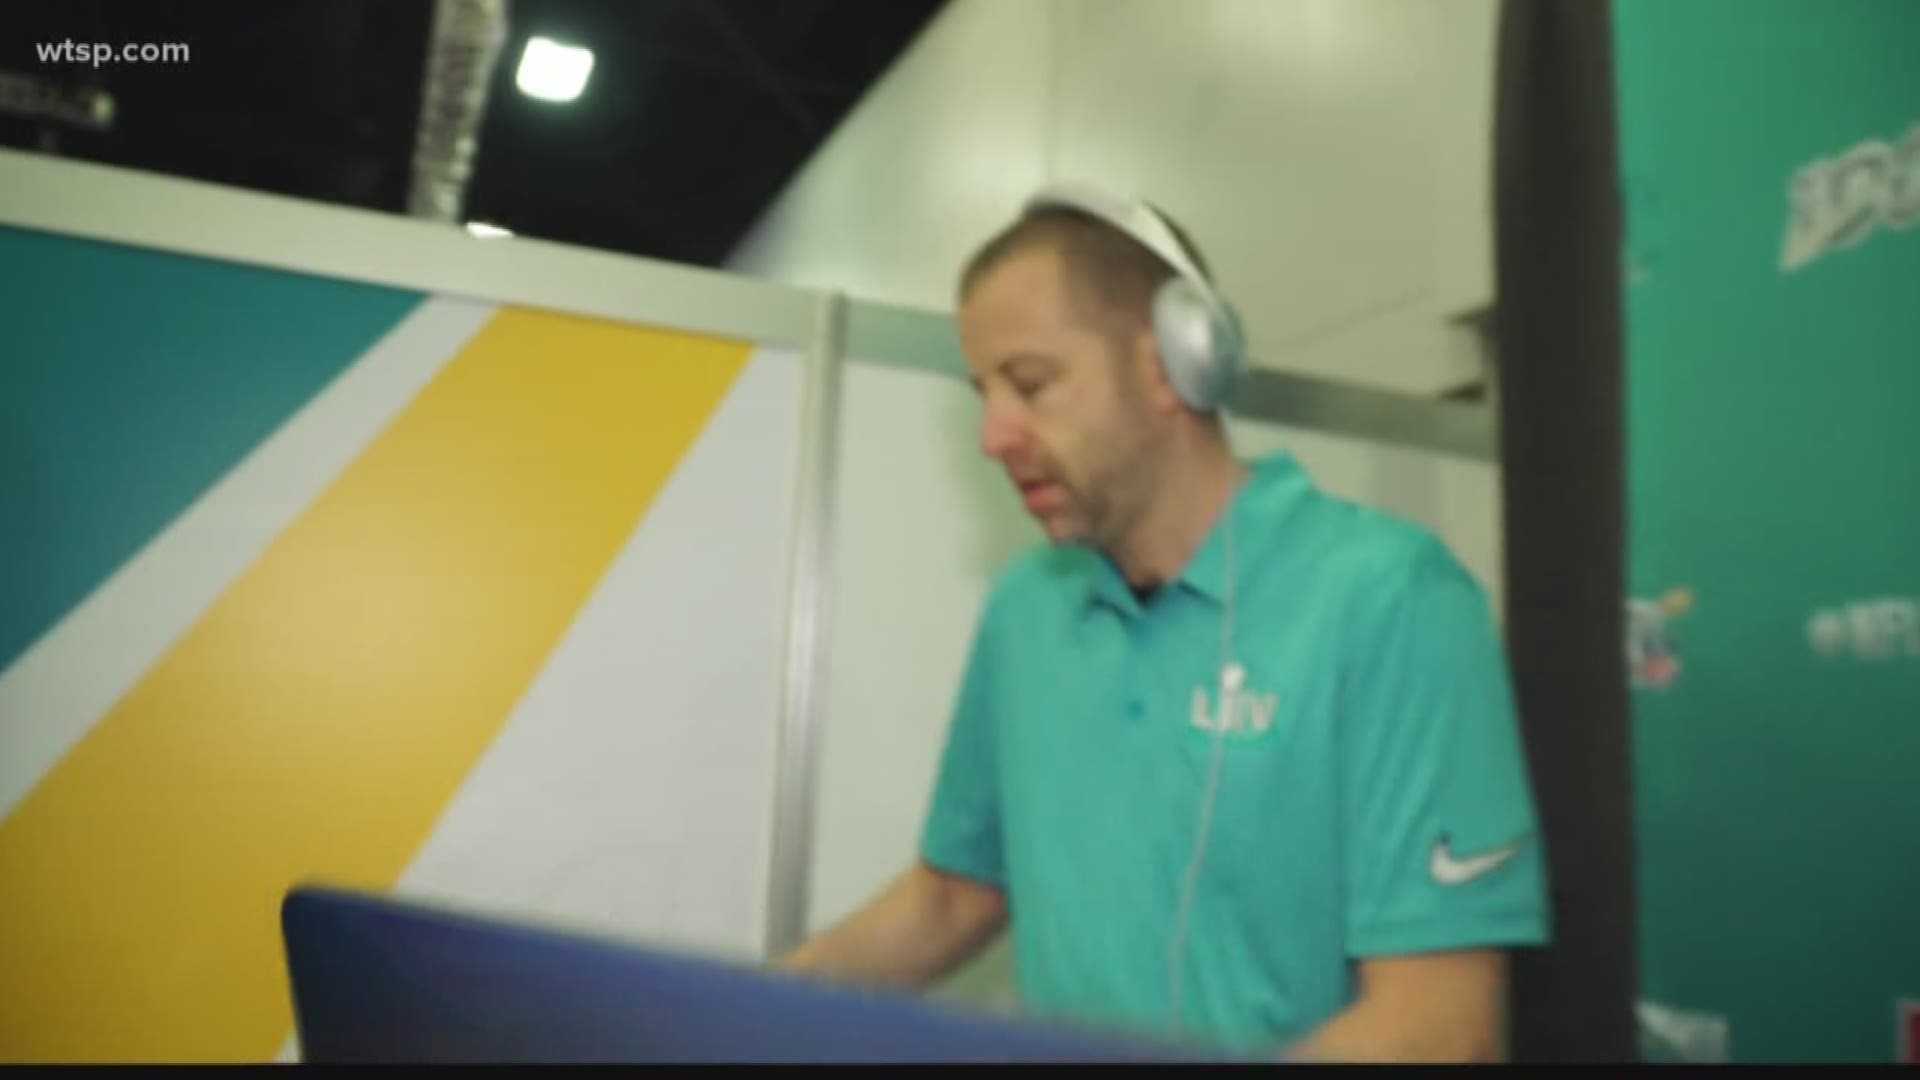 The Tampa Bay Rays official DJ is in Miami for Super Bowl 54.